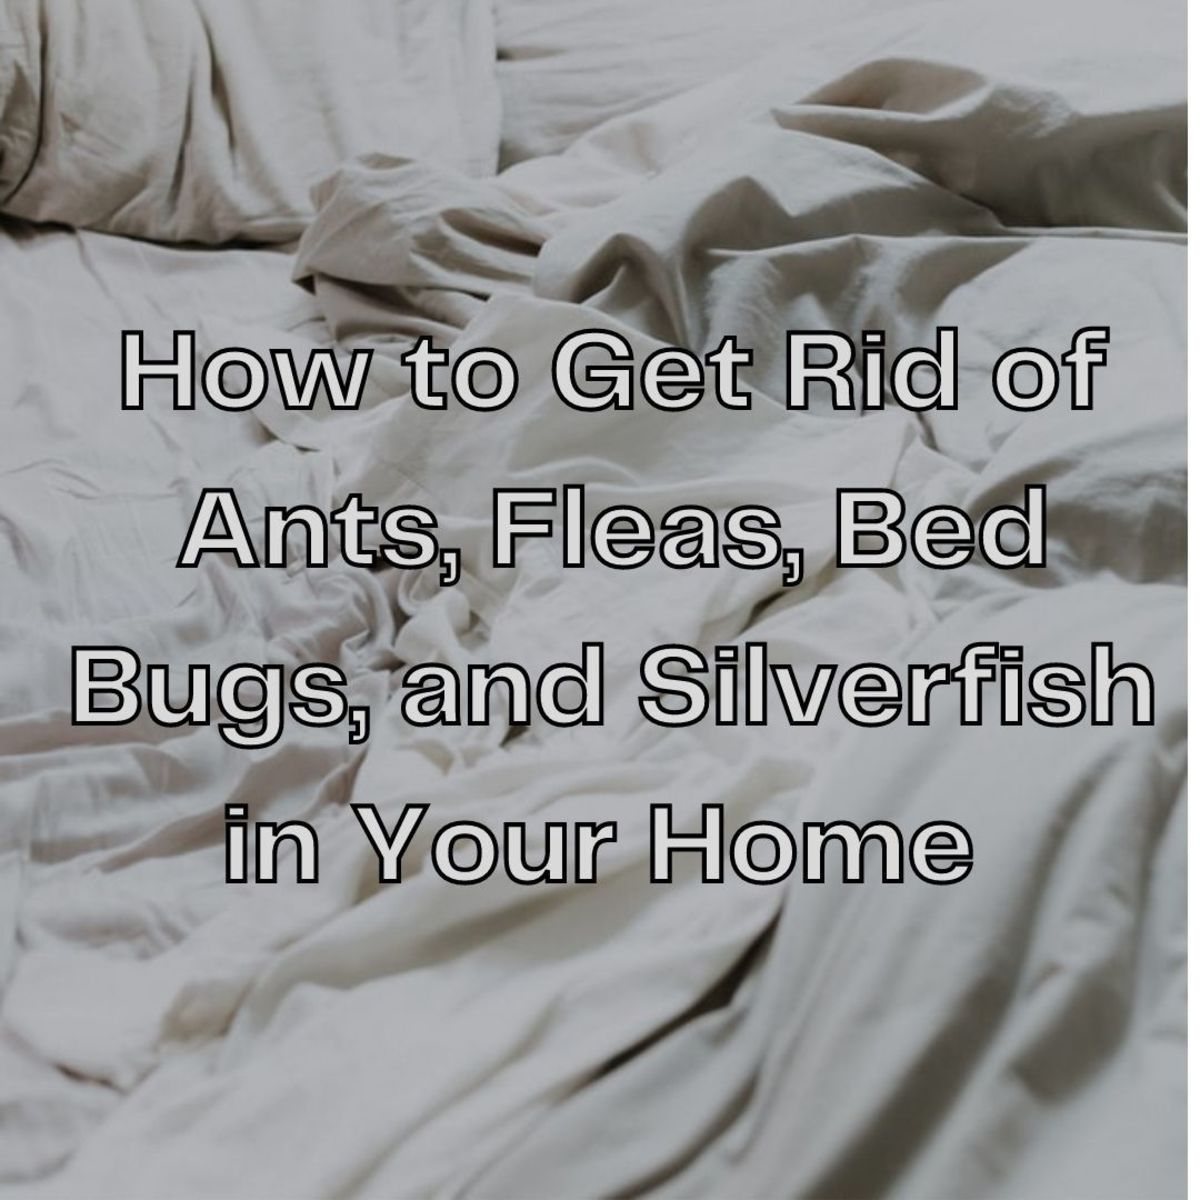 How to Get Rid of Ants, Bedbugs, Fleas, and Silverfish in Your Home